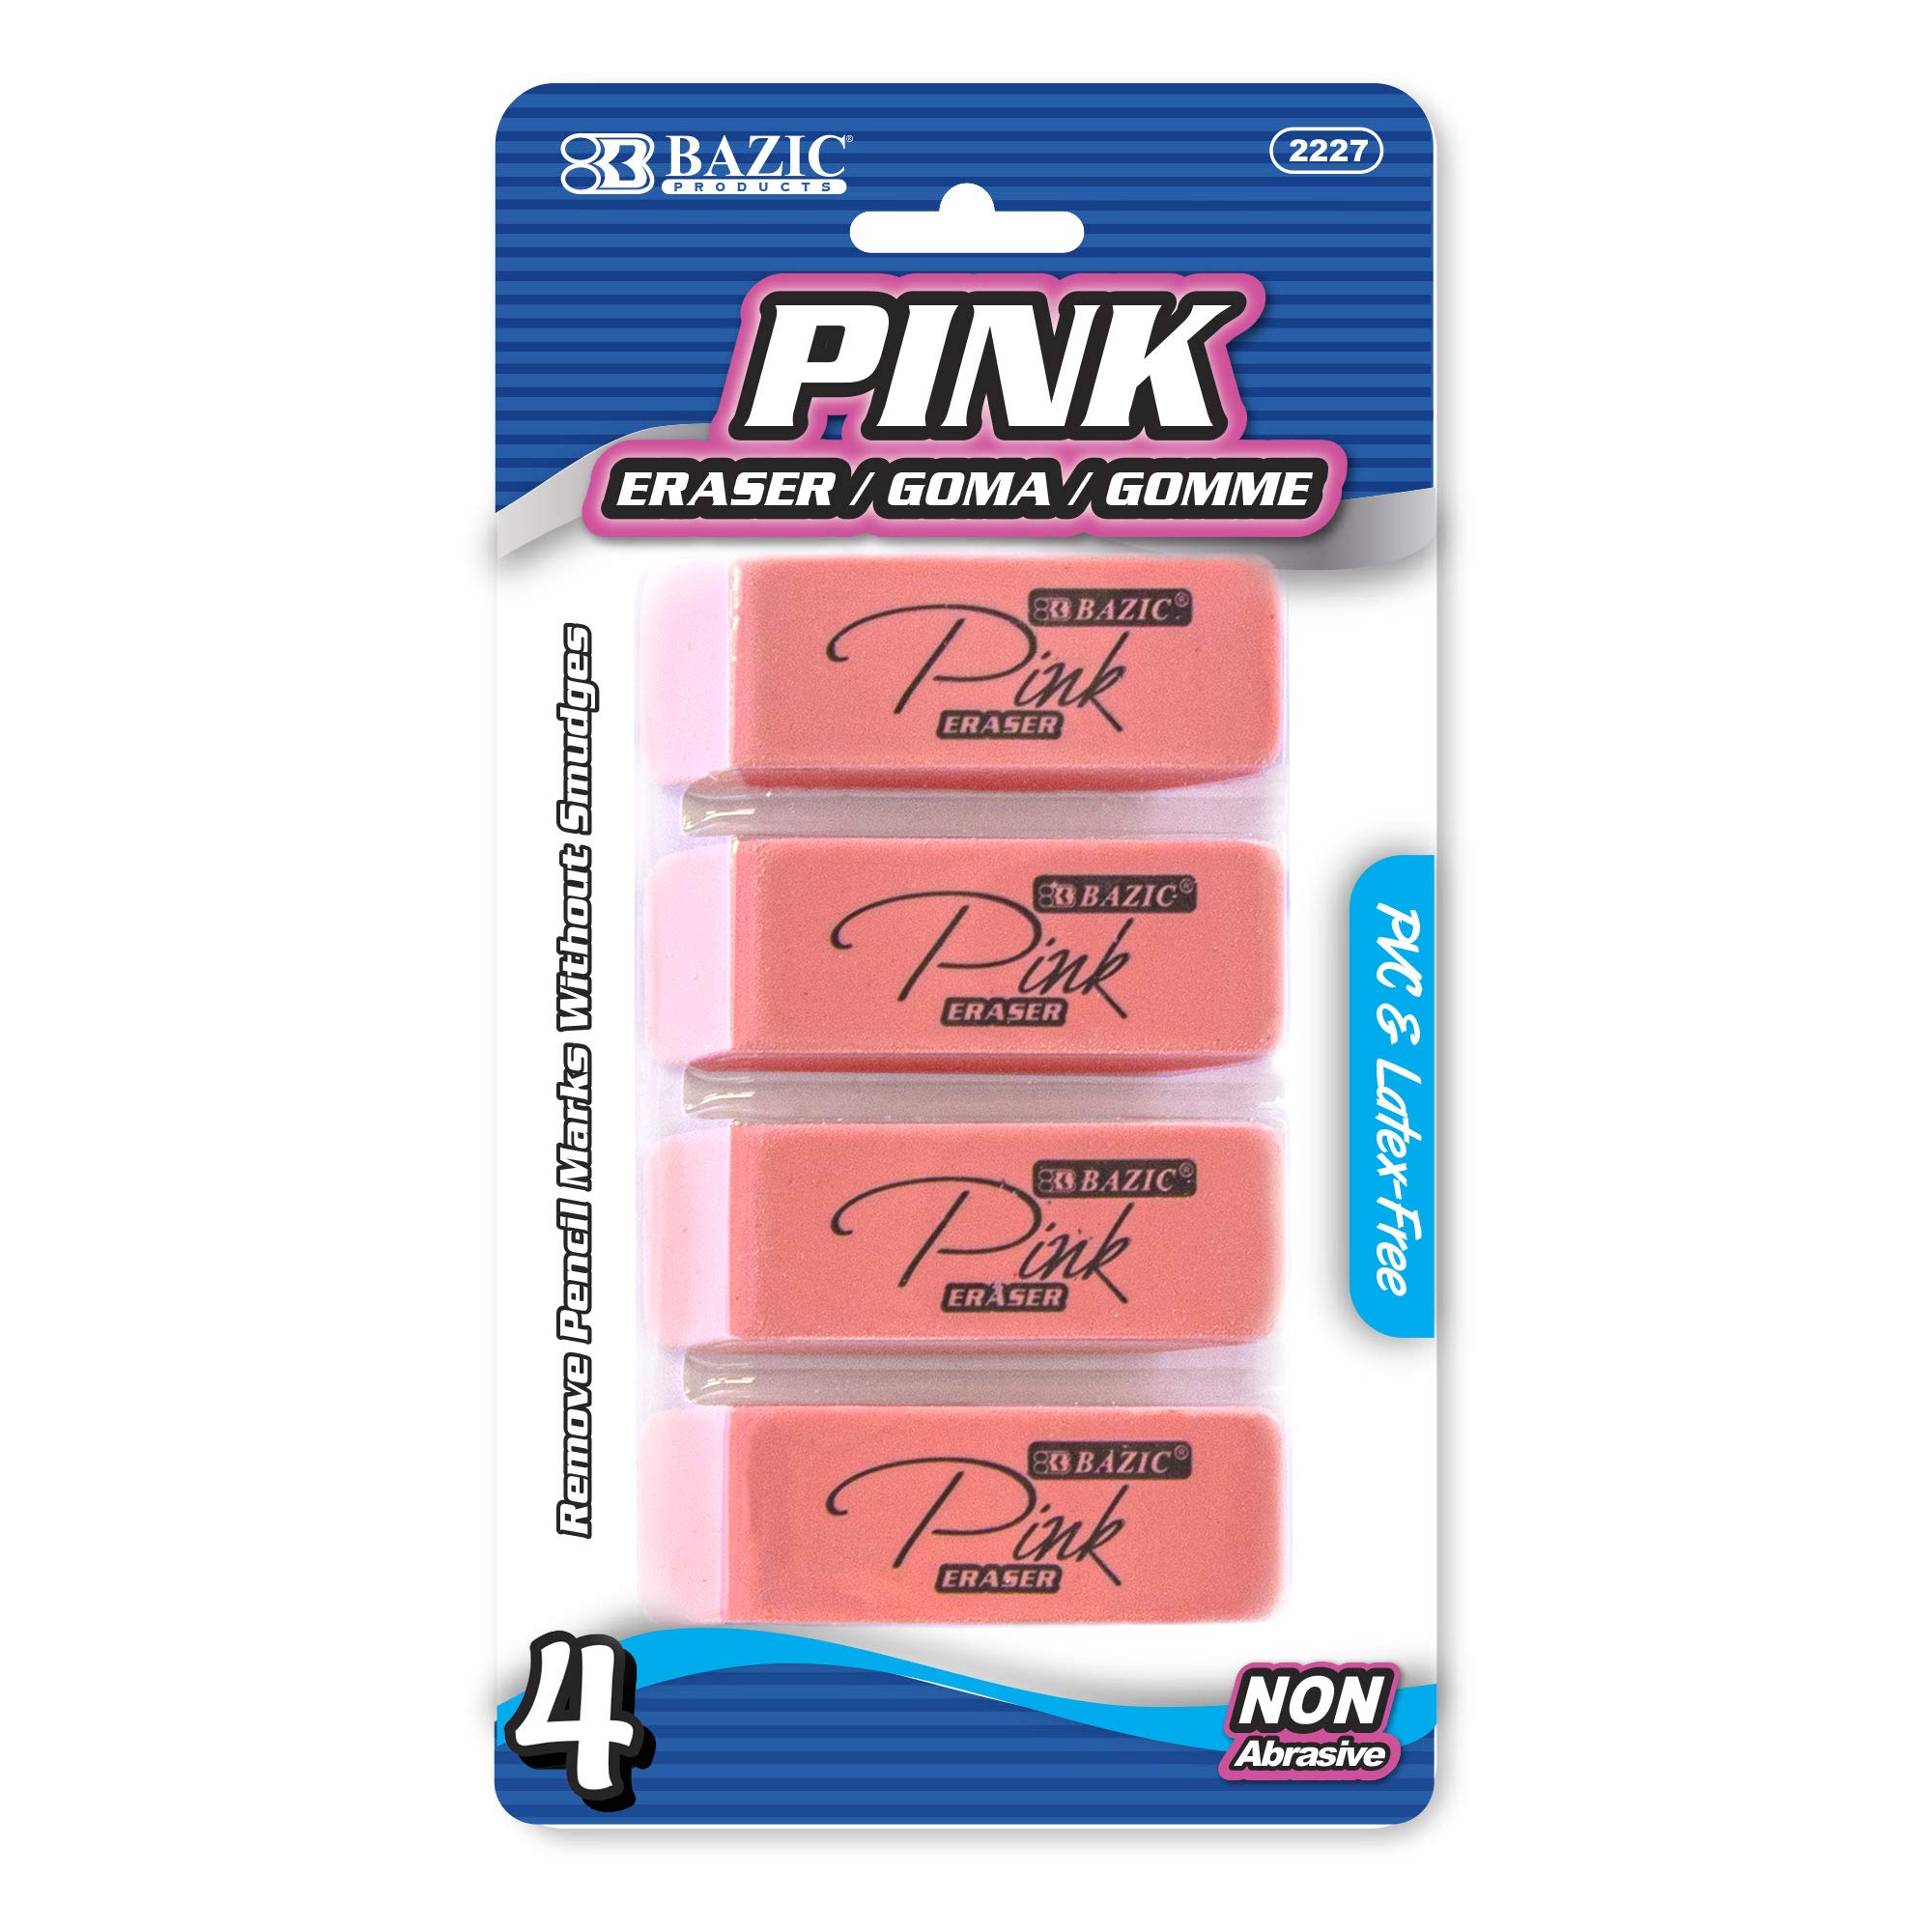 BAZIC Products Erasers